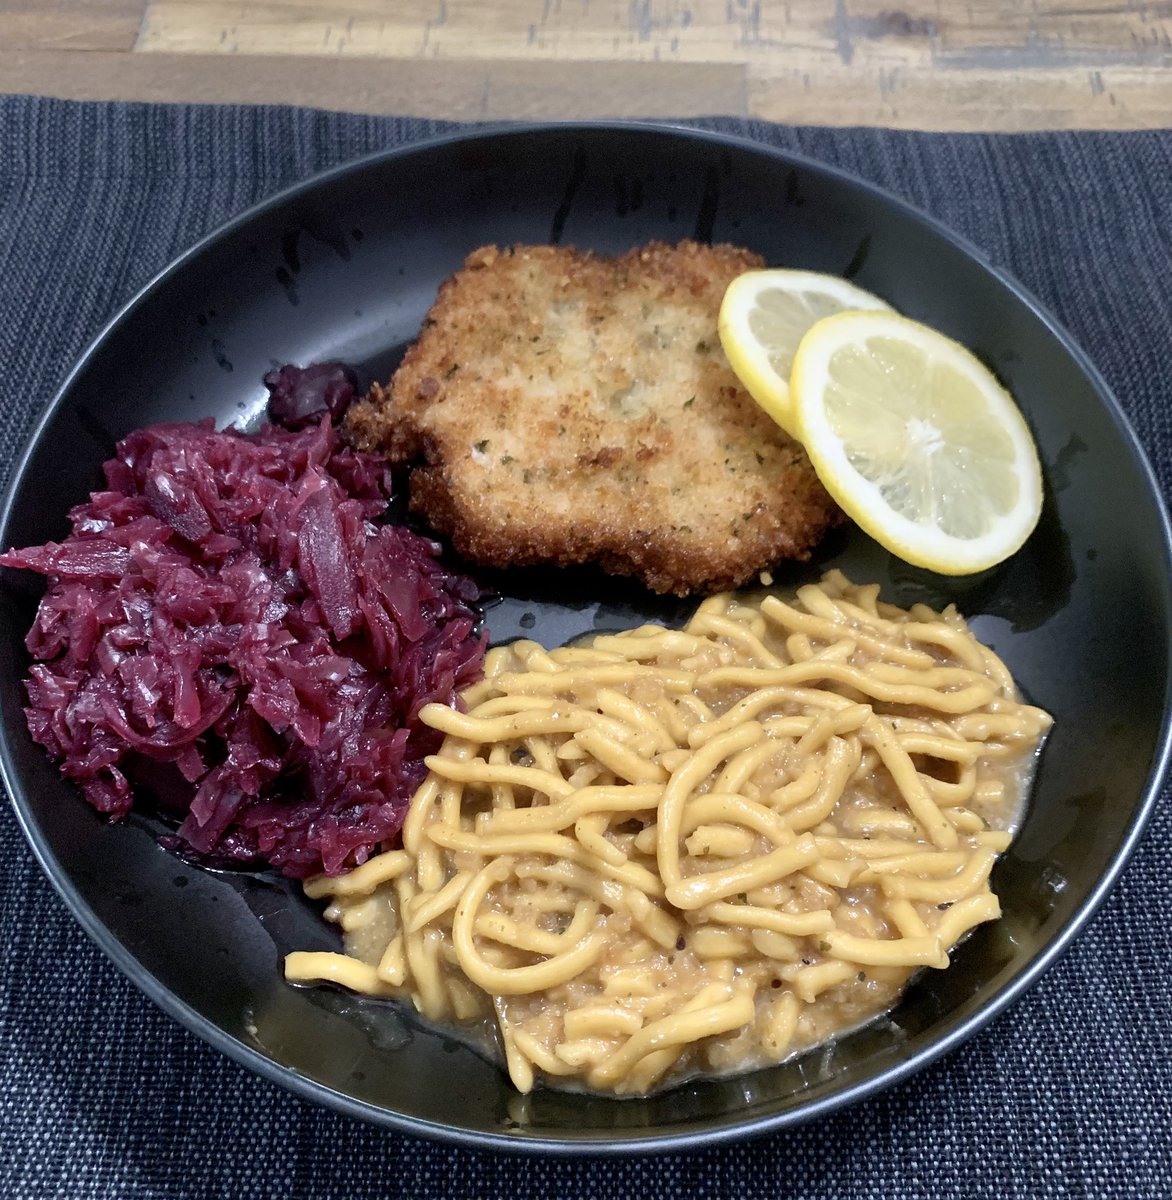 When days don’t always go as planned, #Cooking becomes my zen activity. I’m humbly sharing one of my comfort meals from childhood “Schweineschnitzel with Onion Spätzle and red cabbage”. #germanfood 😊🏴‍☠️